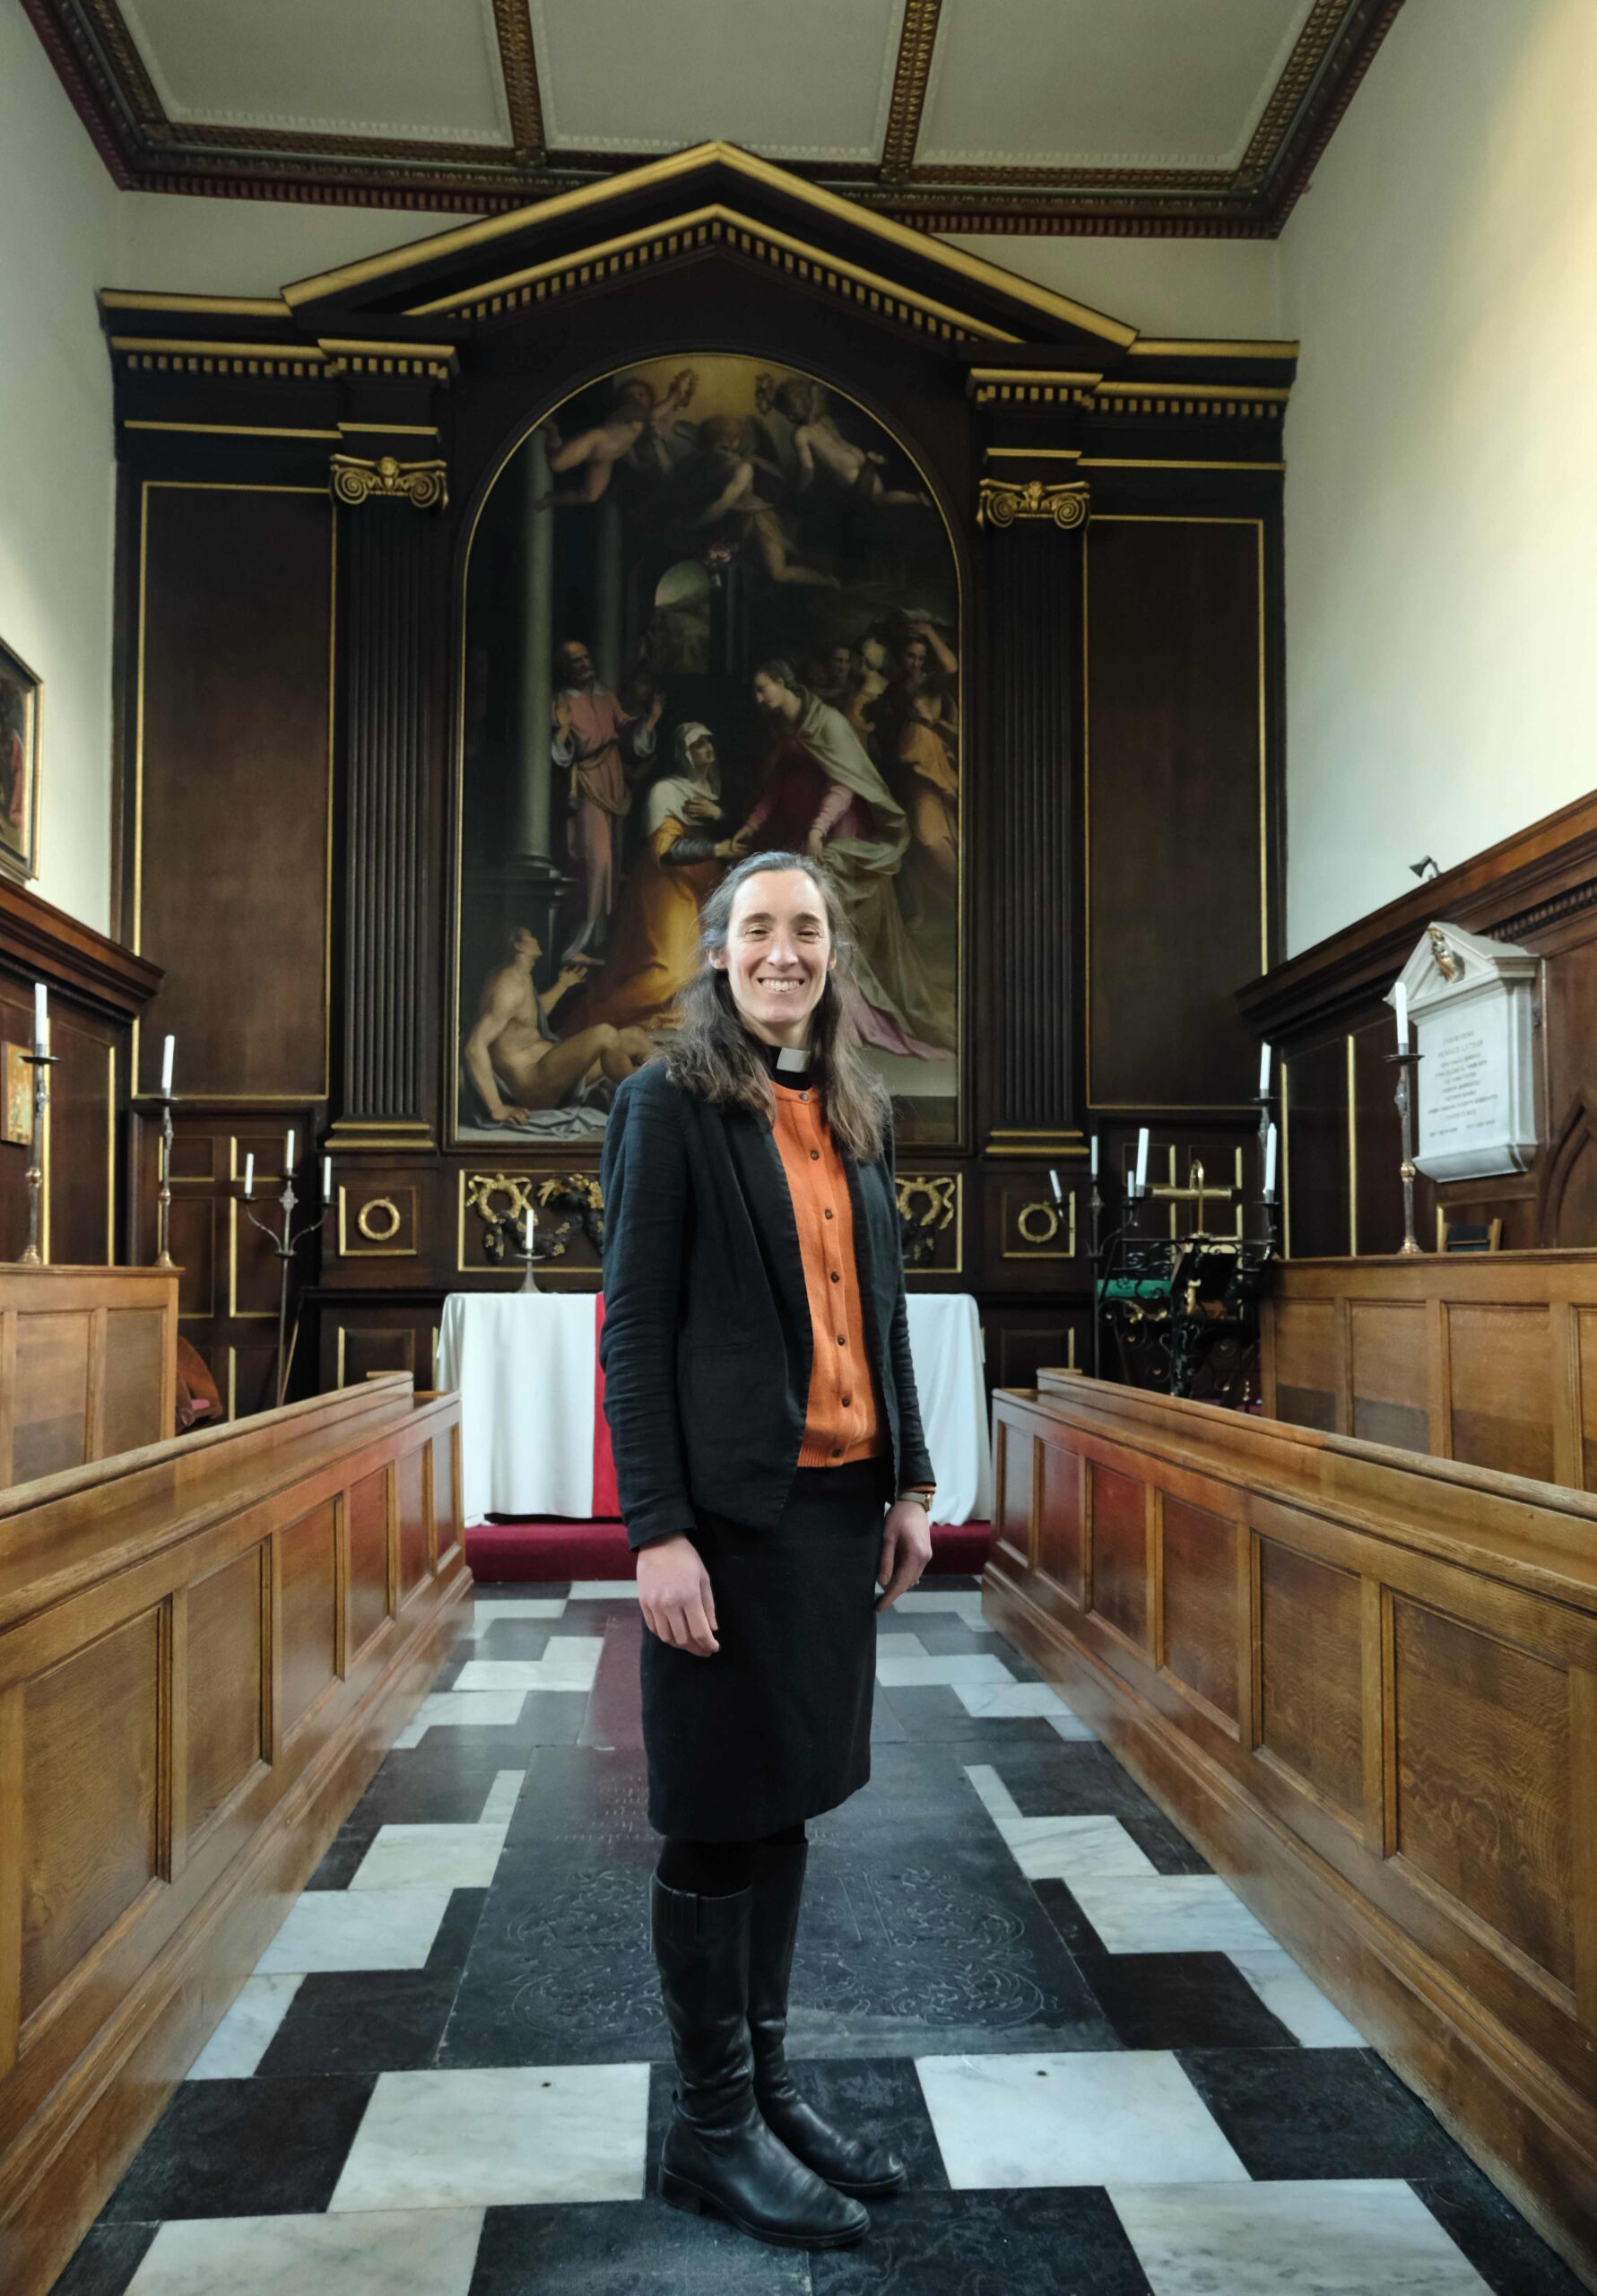 The Reverend Jennifer Totney stood inside Trinity Hall Chapel. The floor is black and white tiles and behind her is a large religious painting behind an altar. She is Acting Dean at the College.